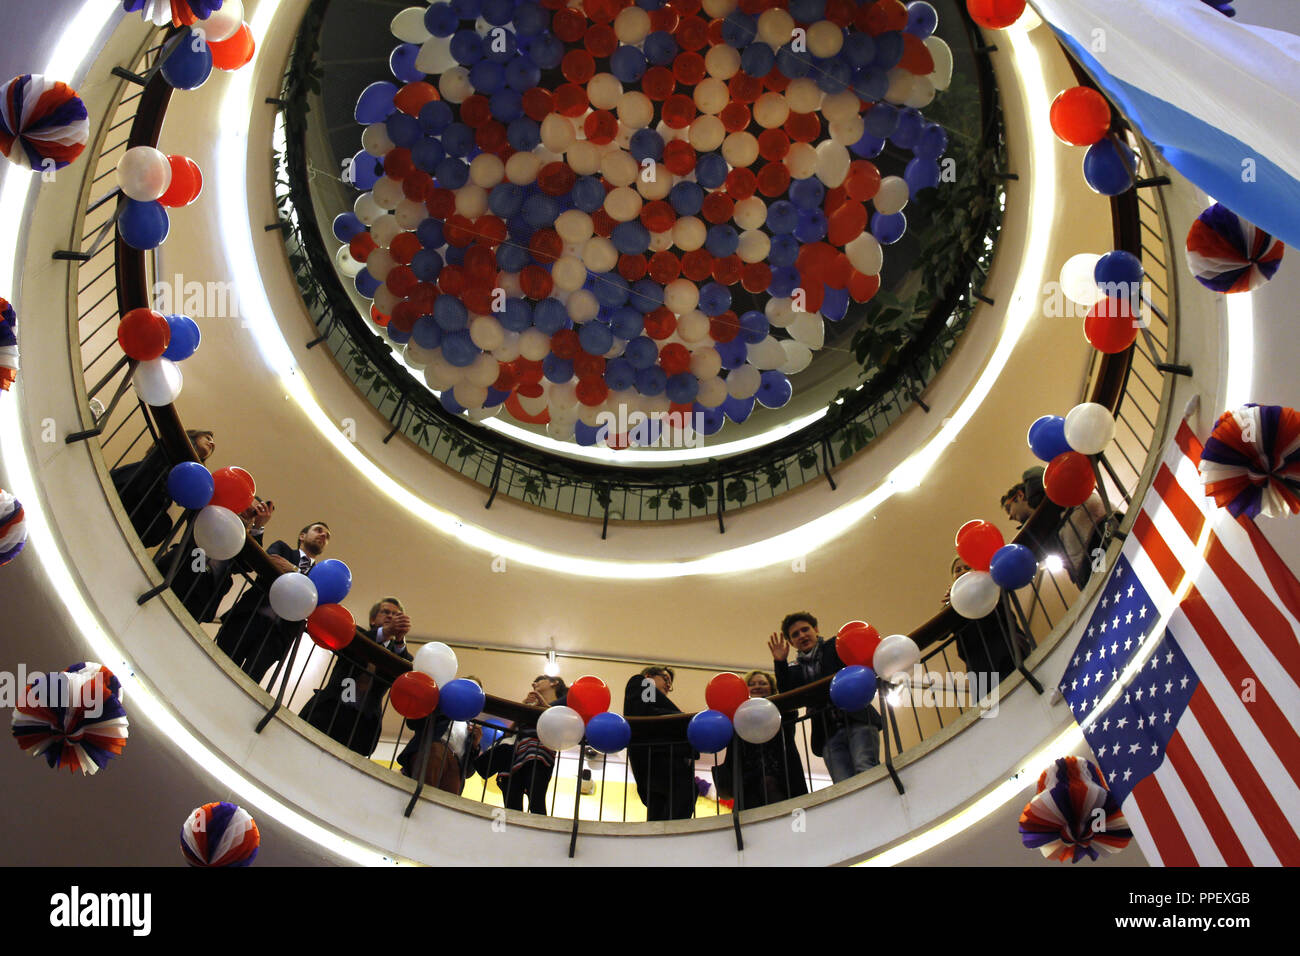 U.S. Election Night 2012 in Munich: Party in the night of the U.S. presidential election in the Amerika-Haus on Karolinenplatz. In the picture, guests in the rotunda that is decorated with red, white and blue balloons. Stock Photo